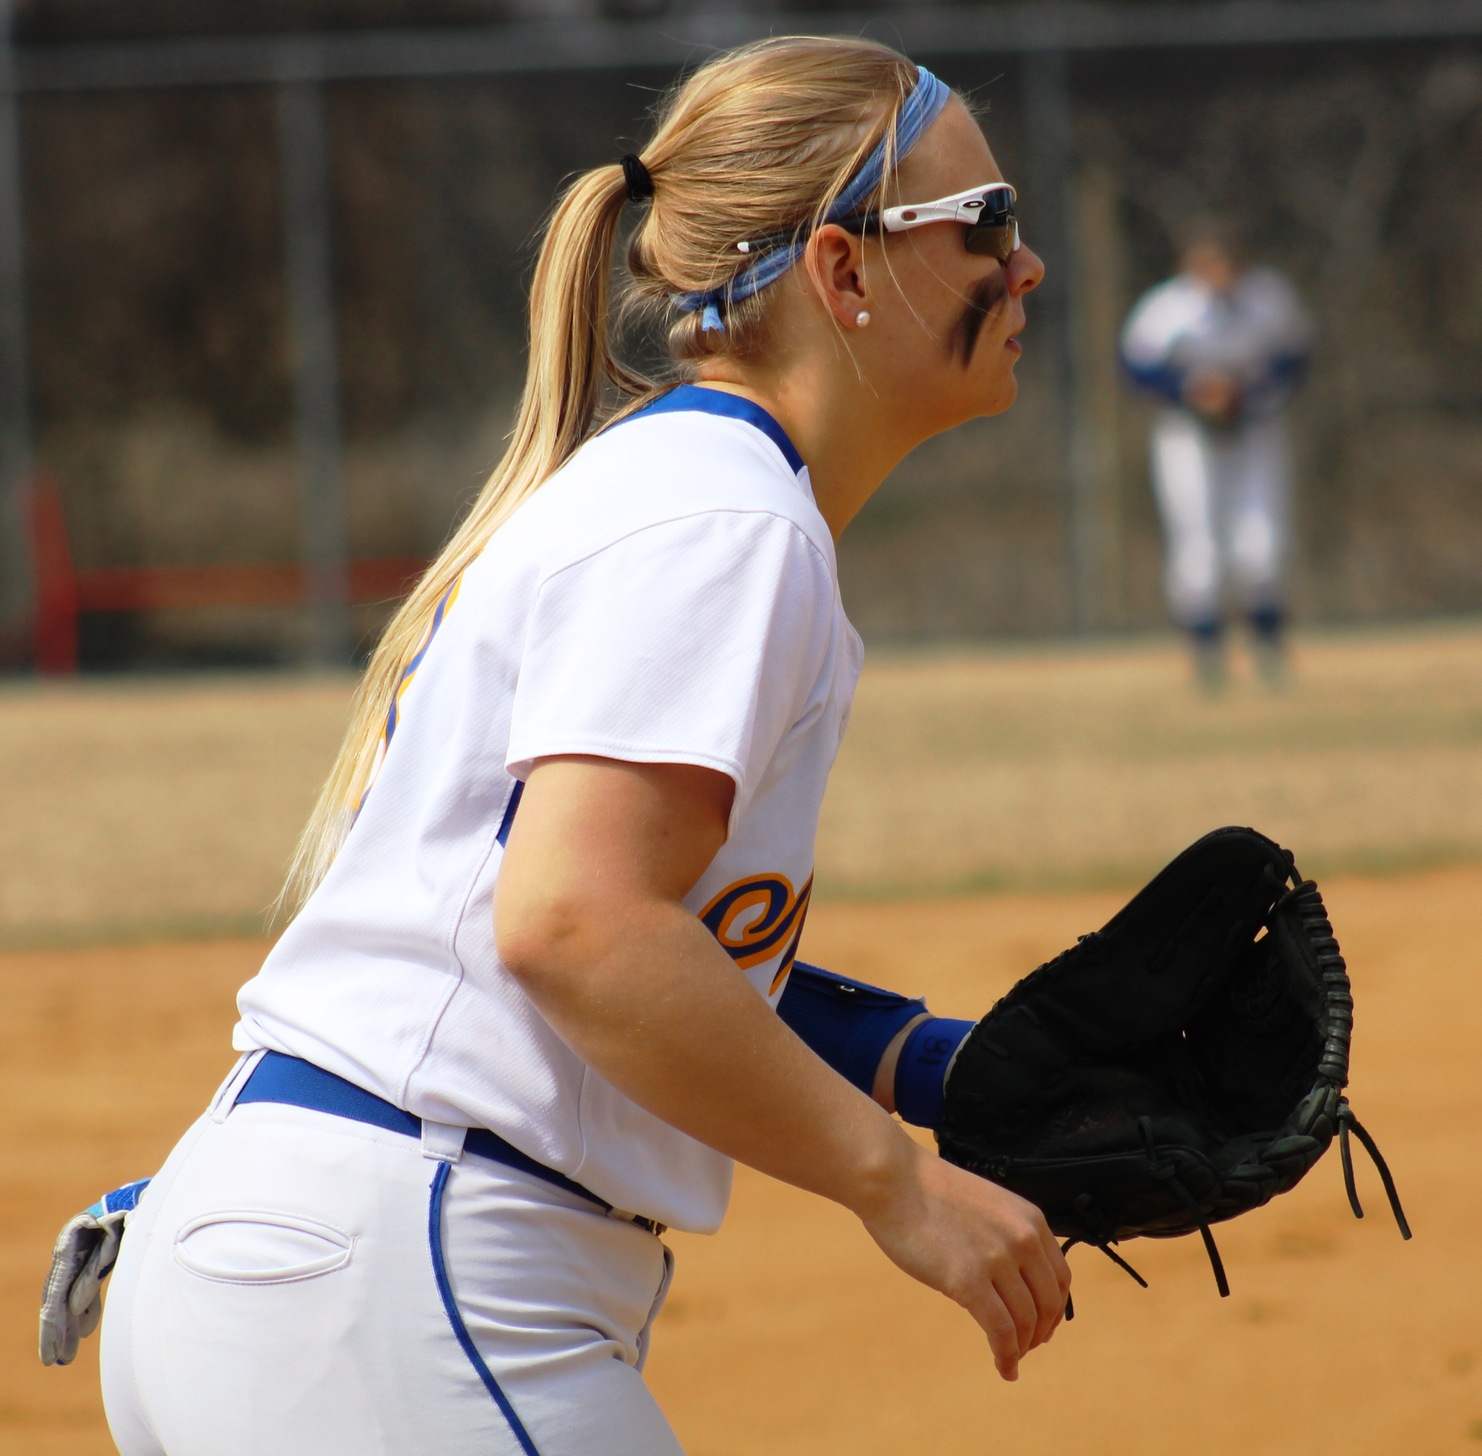 Third baseman Shelby Low gets ready for the pitch during a game against Iowa Central in Oskaloosa earlier this season.